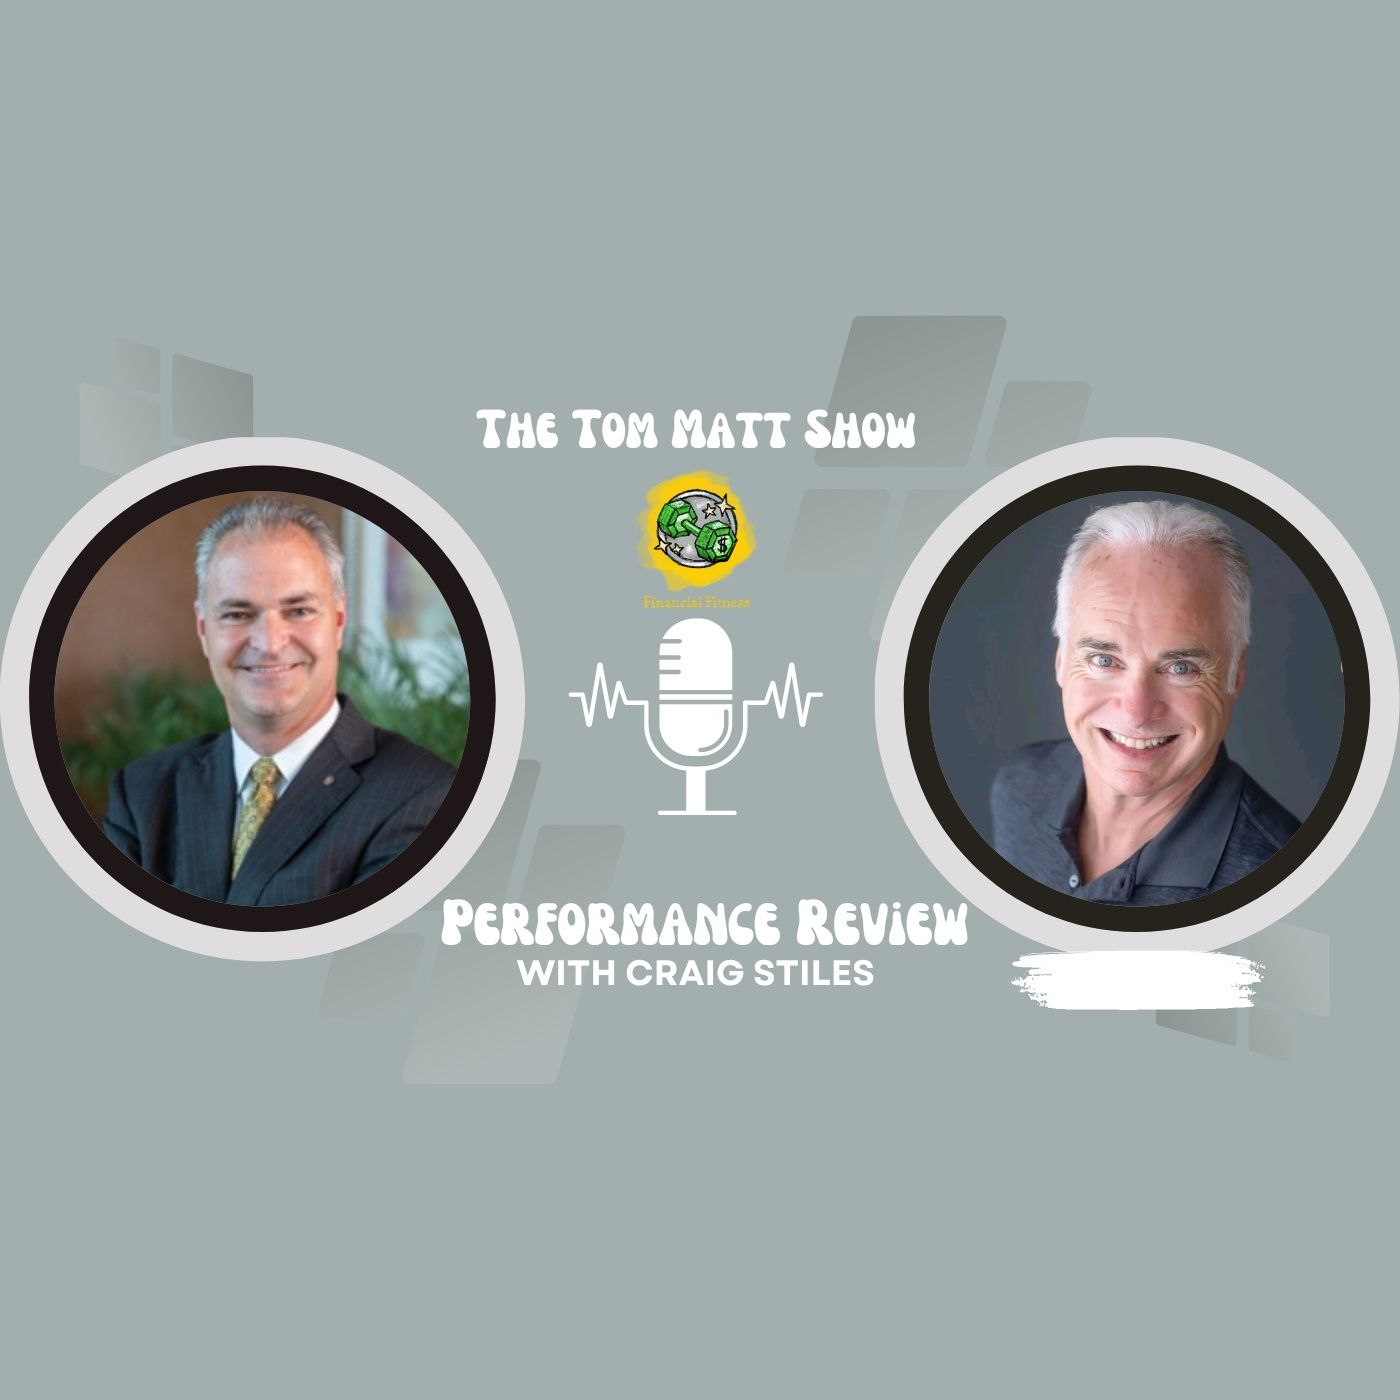 Performance Review, Why Success Planning Works guest Craig Stiles